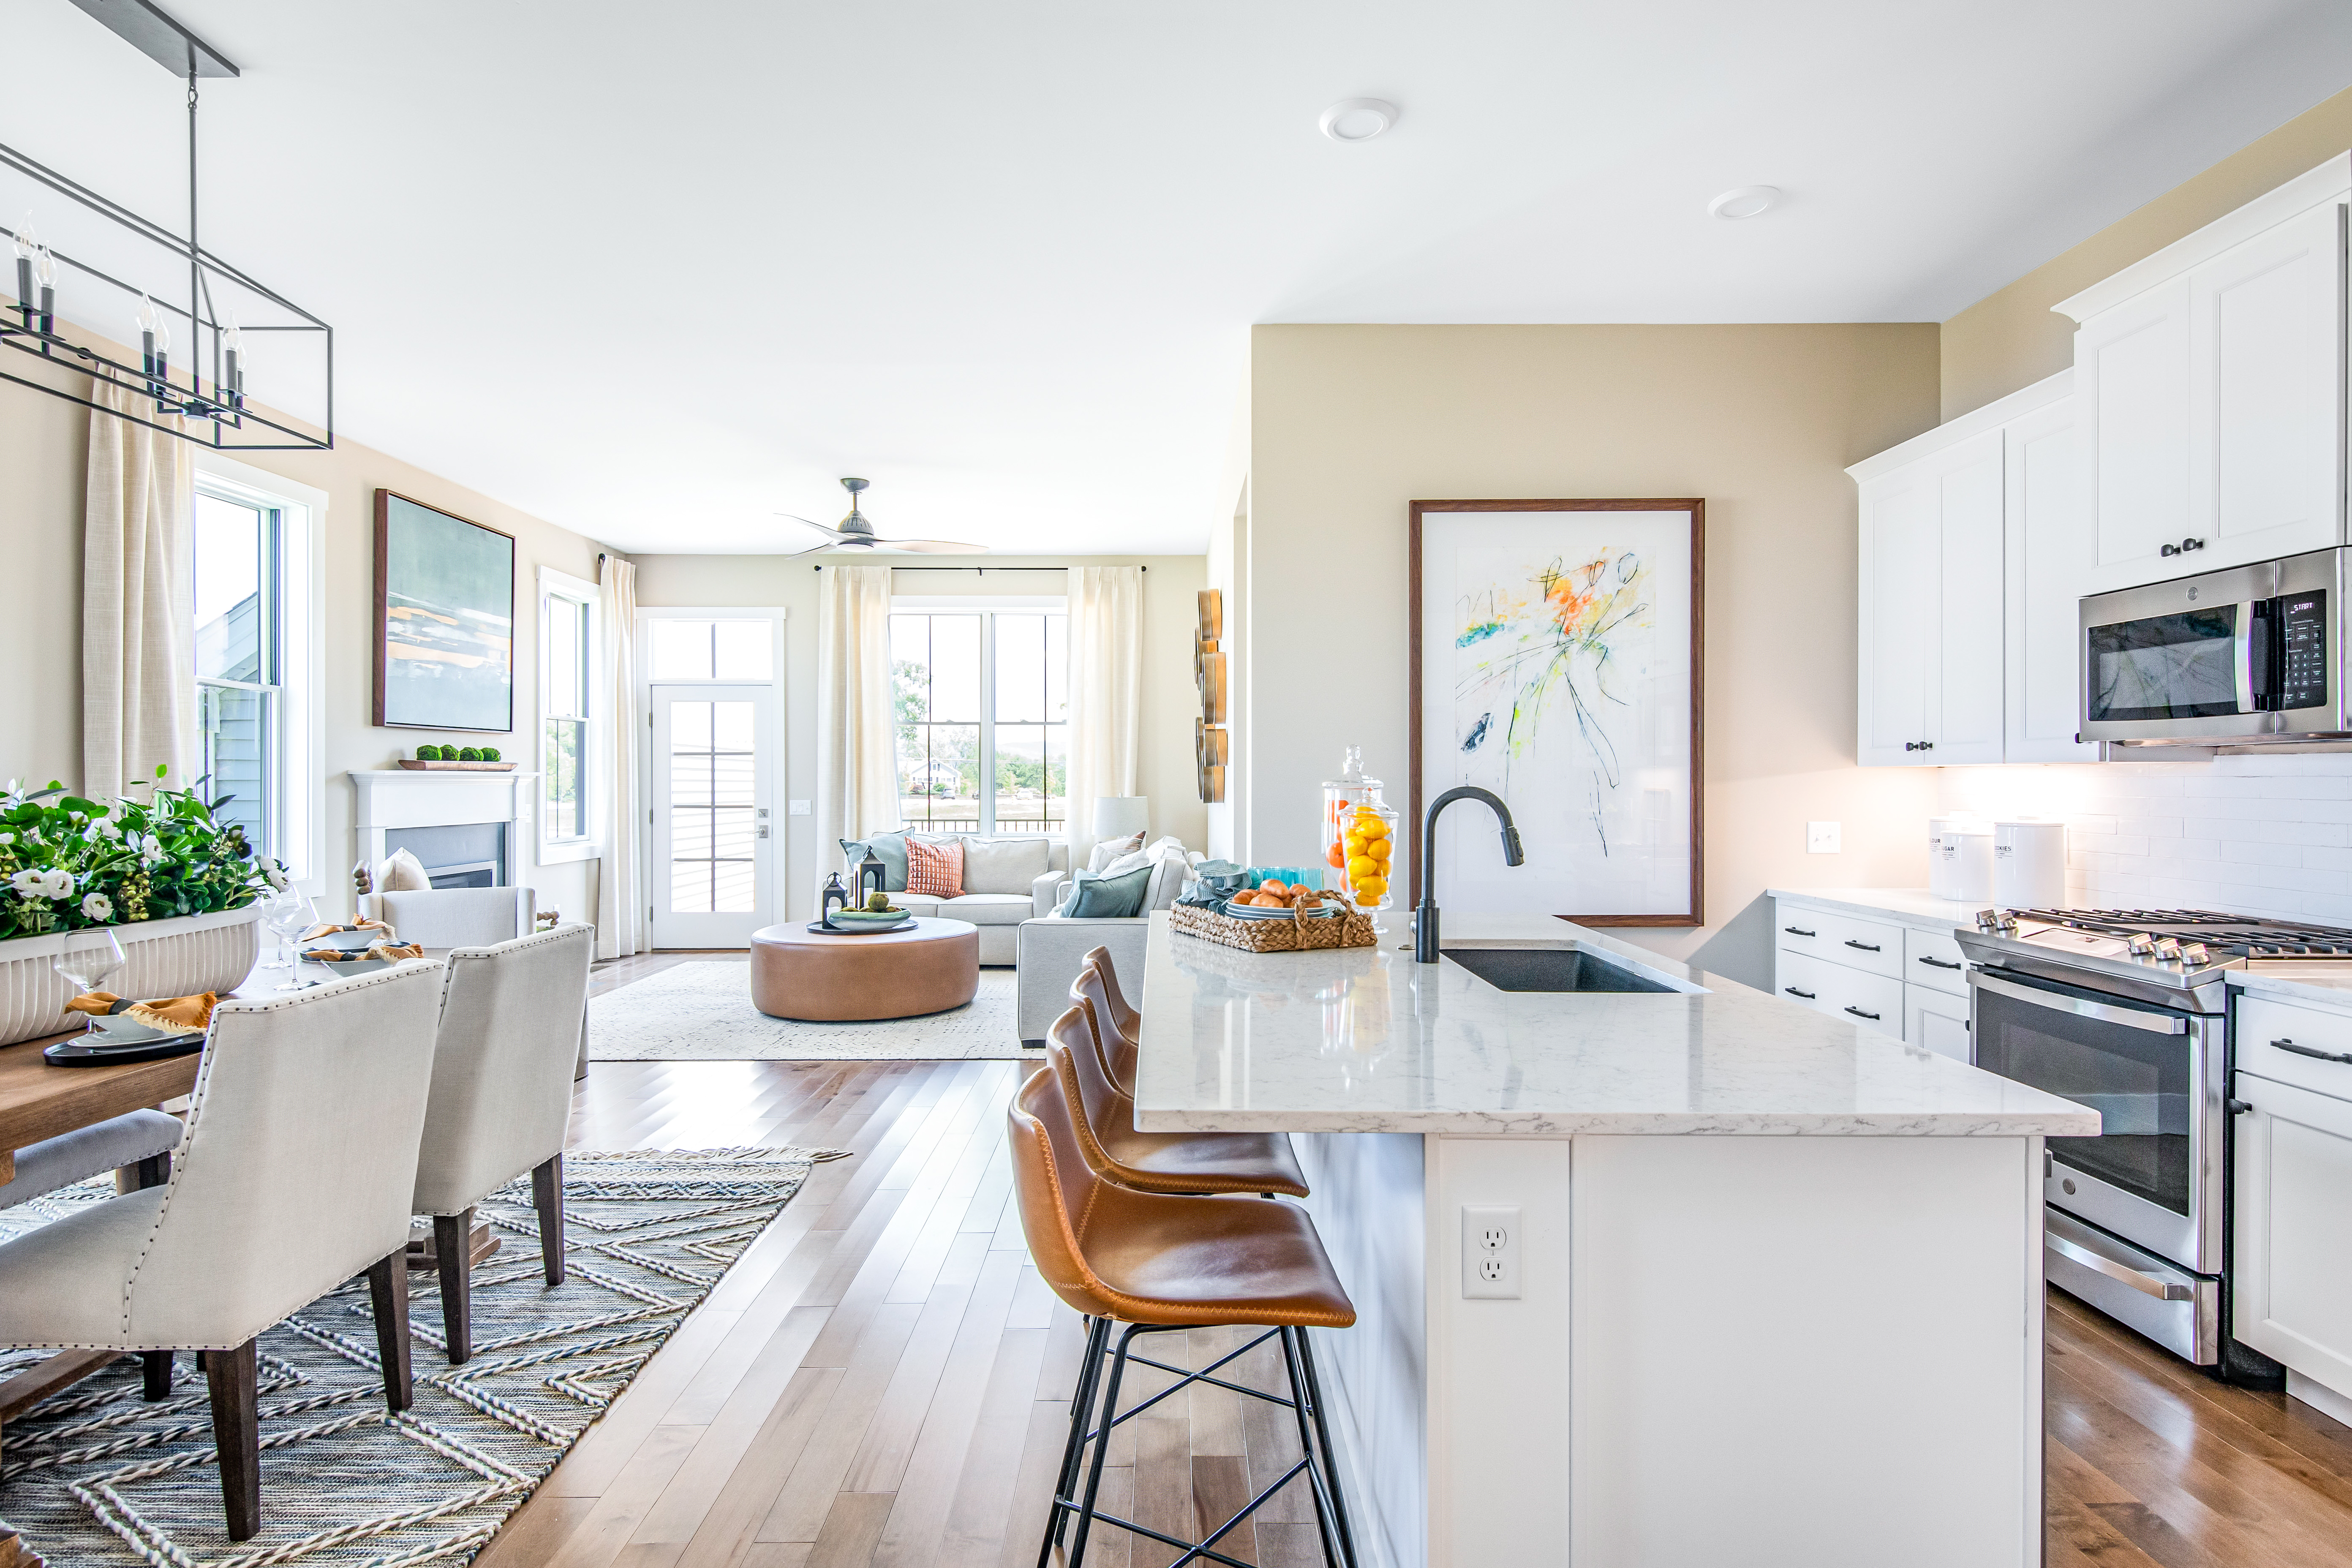 Bright, open-plan kitchen and living area with modern white cabinets, stainless steel appliances, a central island with bar stools, a dining area, and a cozy seating area leading to a sunny balcony.